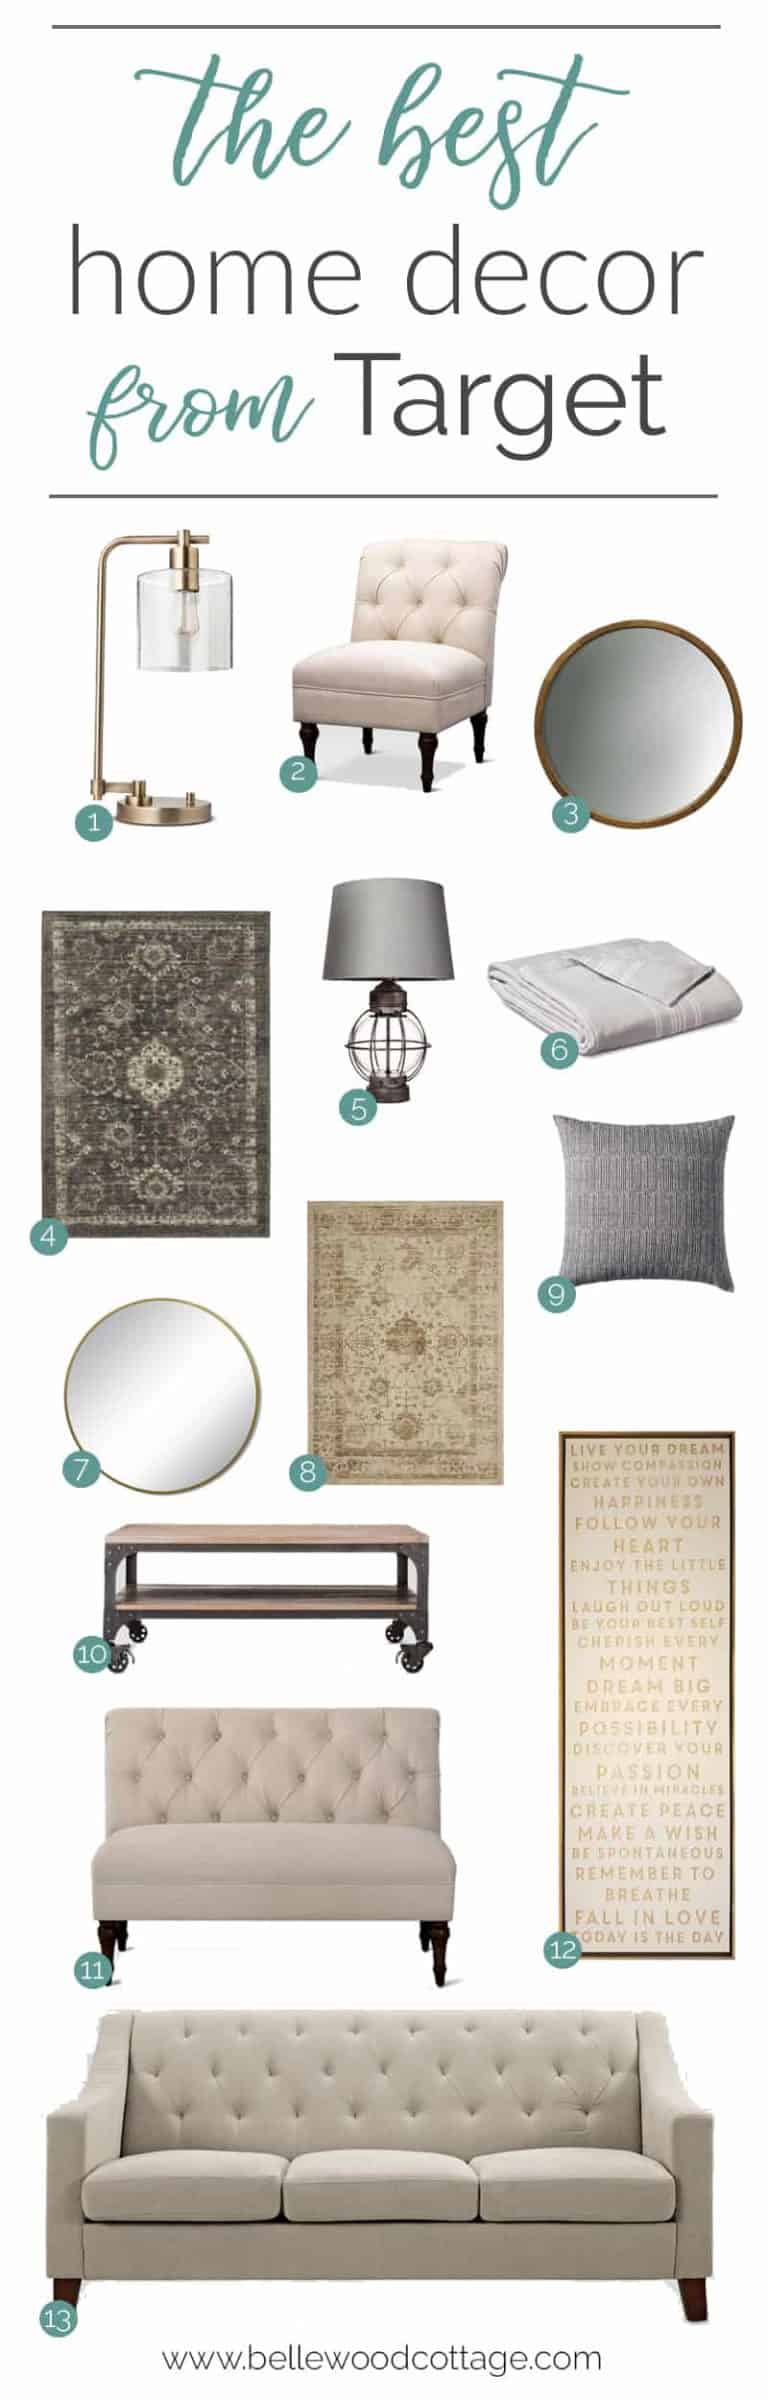 The Best Home Decor at Target